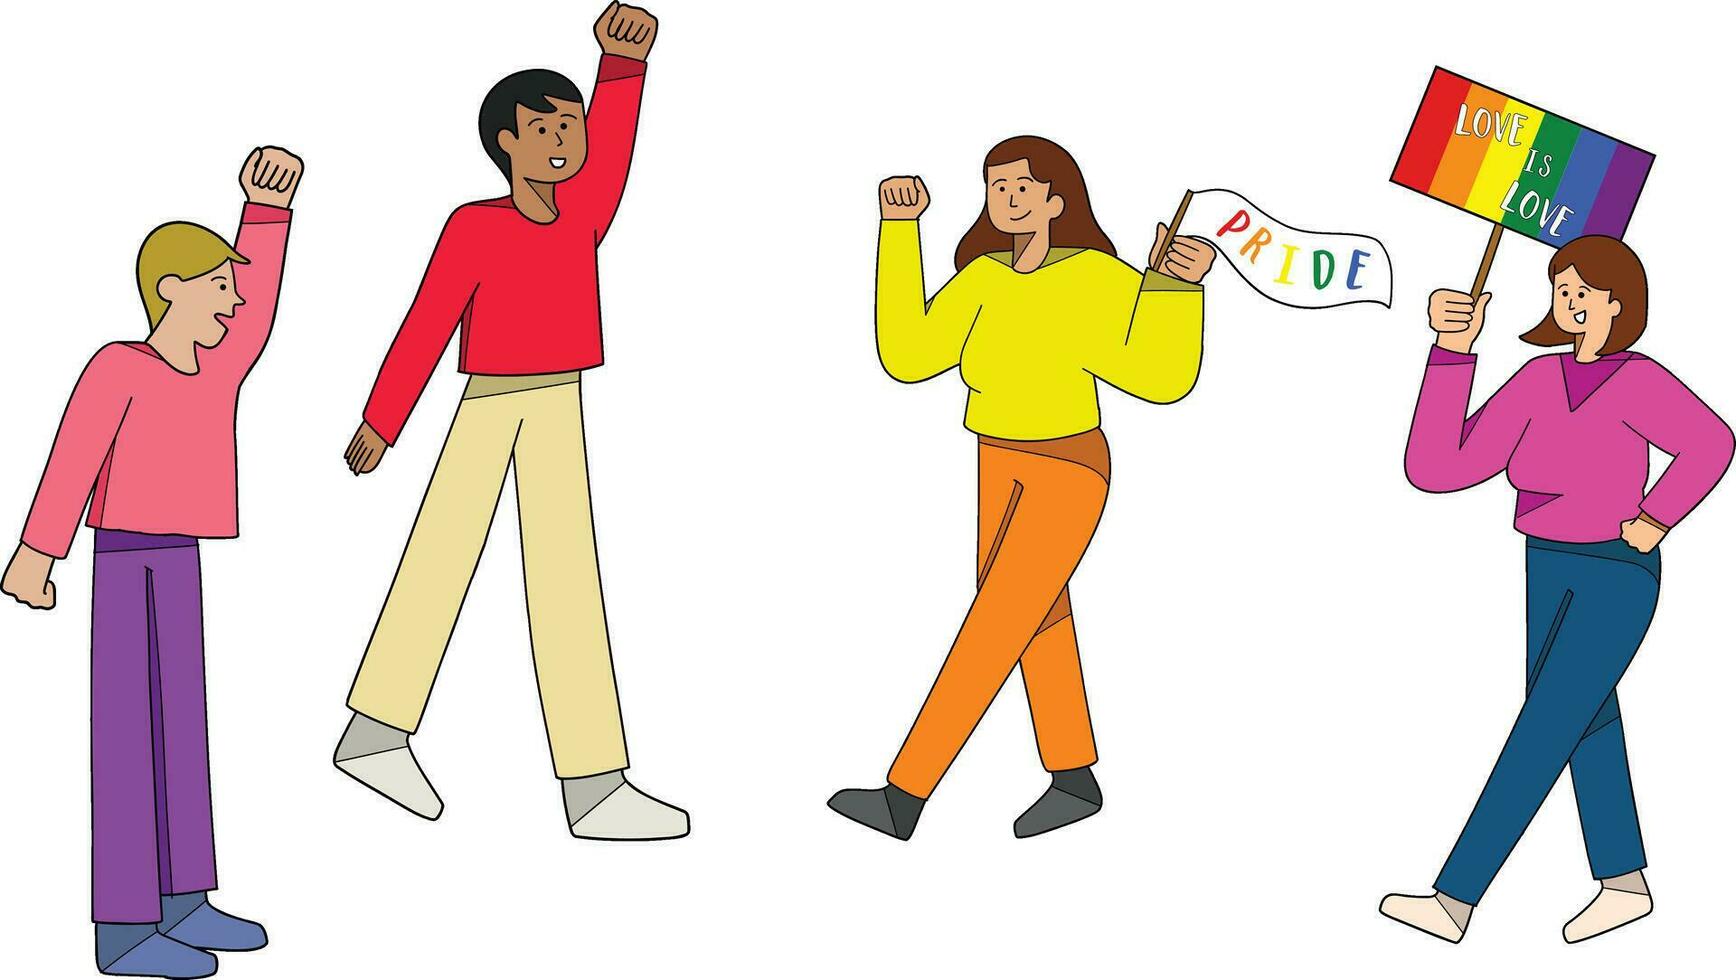 Pride community parade with supporters colourful vector illustration.